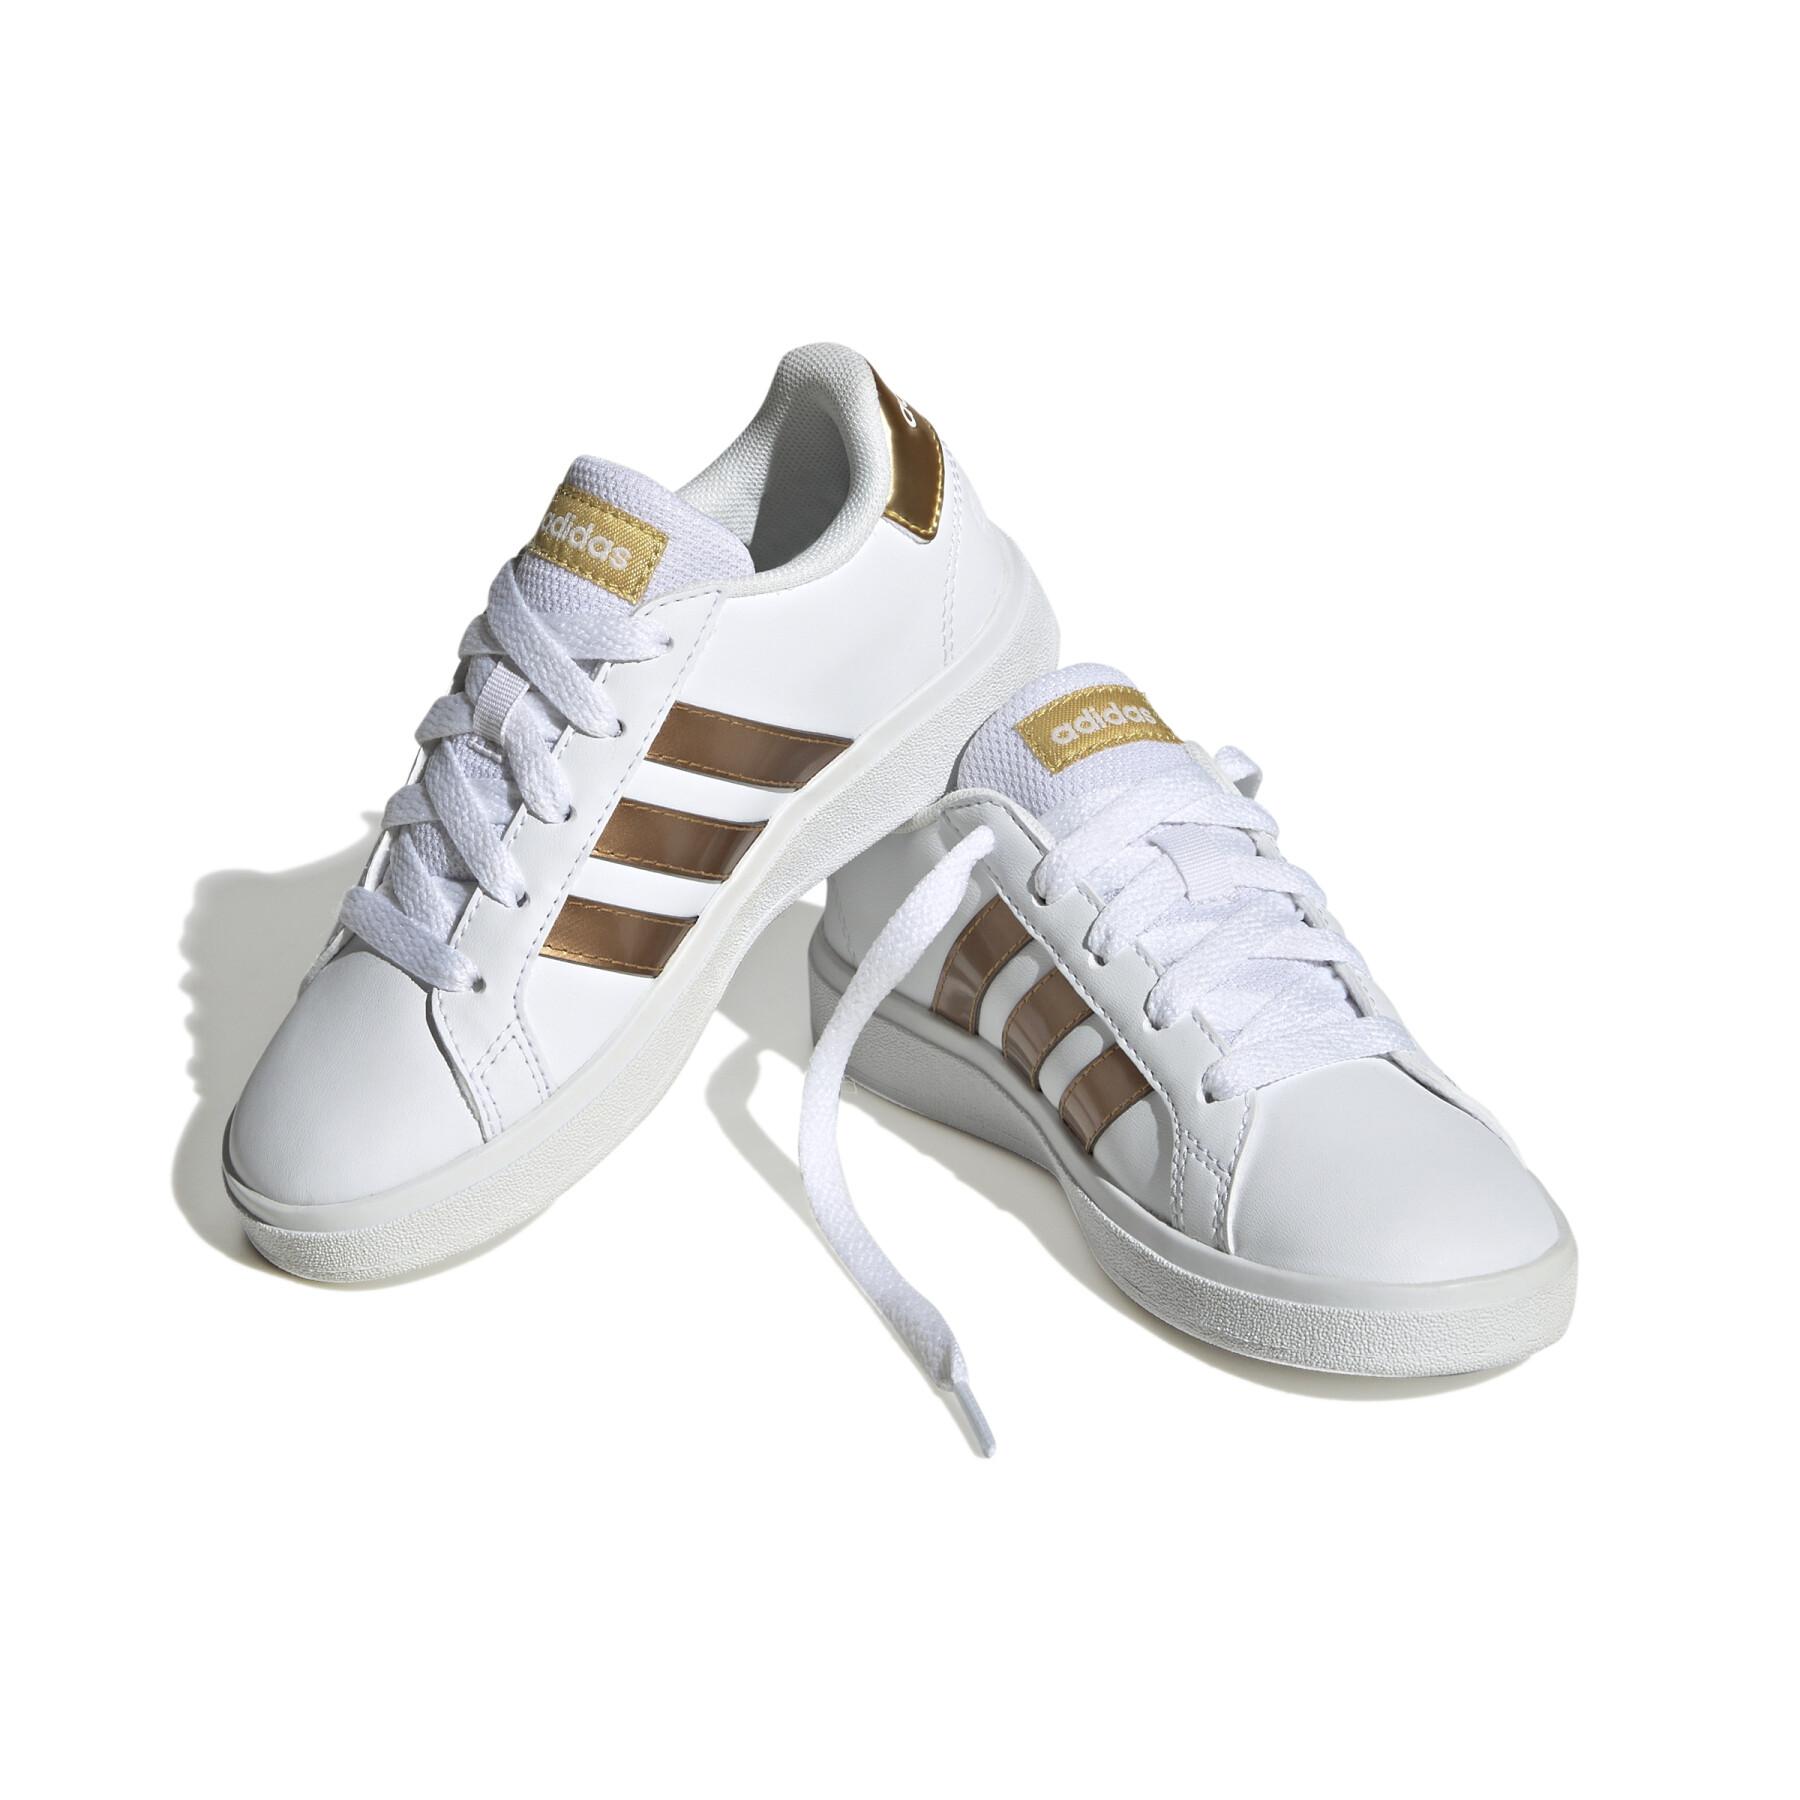 Children's lace-up sneakers adidas Grand